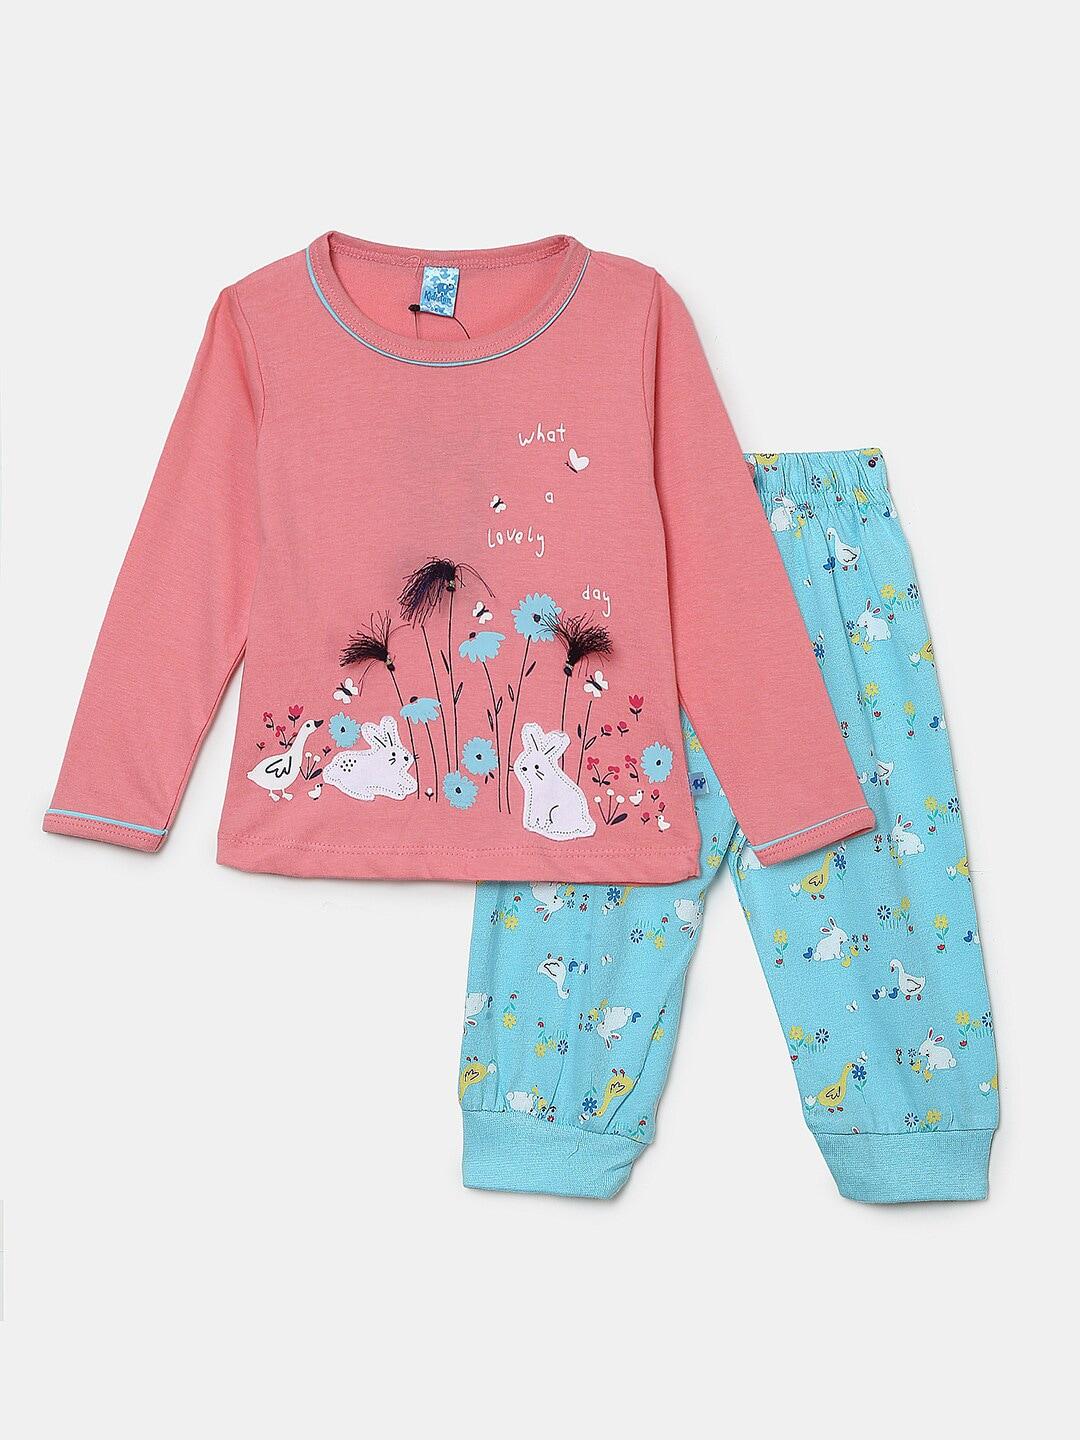 V-Mart Girls Pink & Blue Printed Pure Cotton Top with Pyjamas